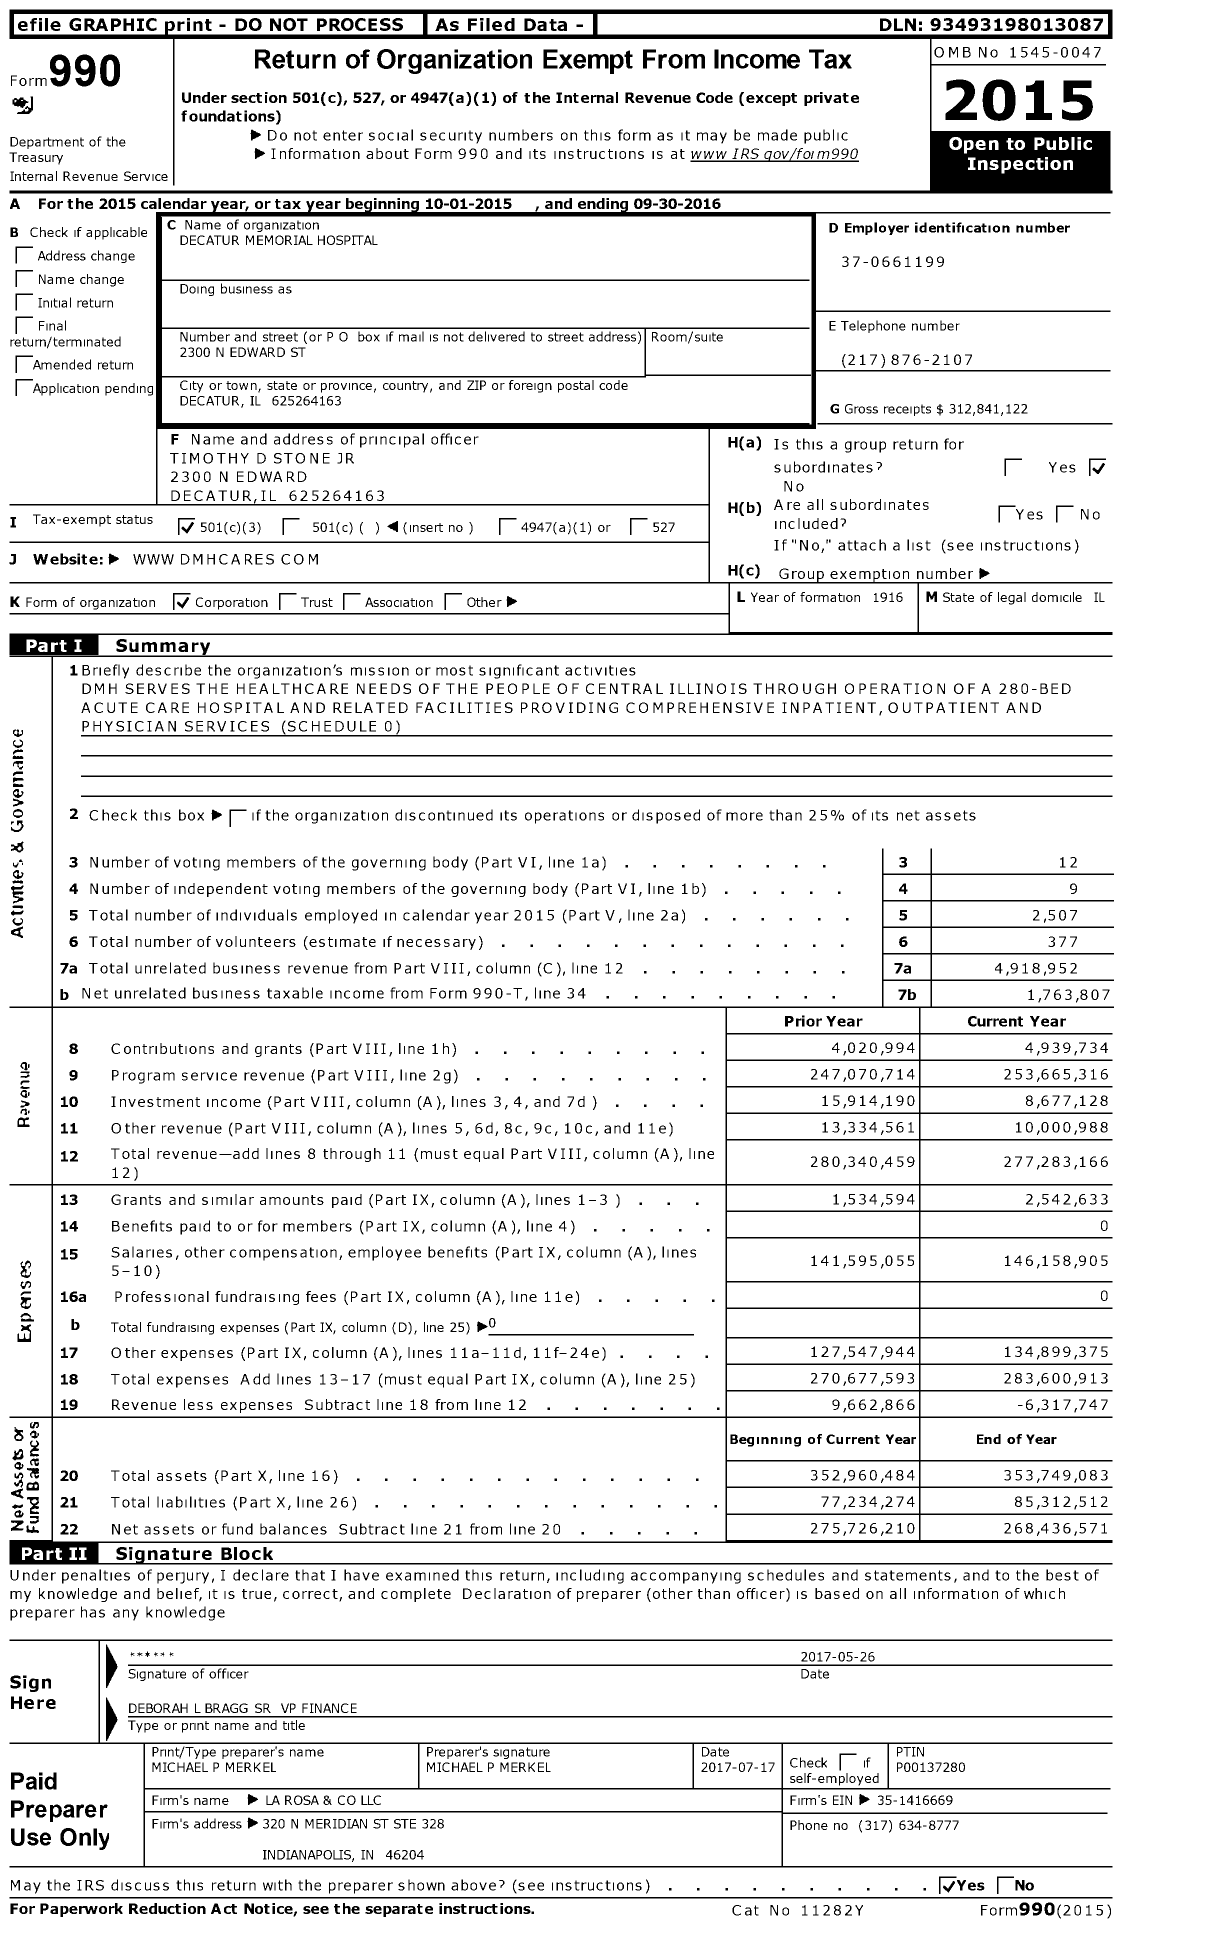 Image of first page of 2015 Form 990 for Decatur Memorial Hospital (DMH)